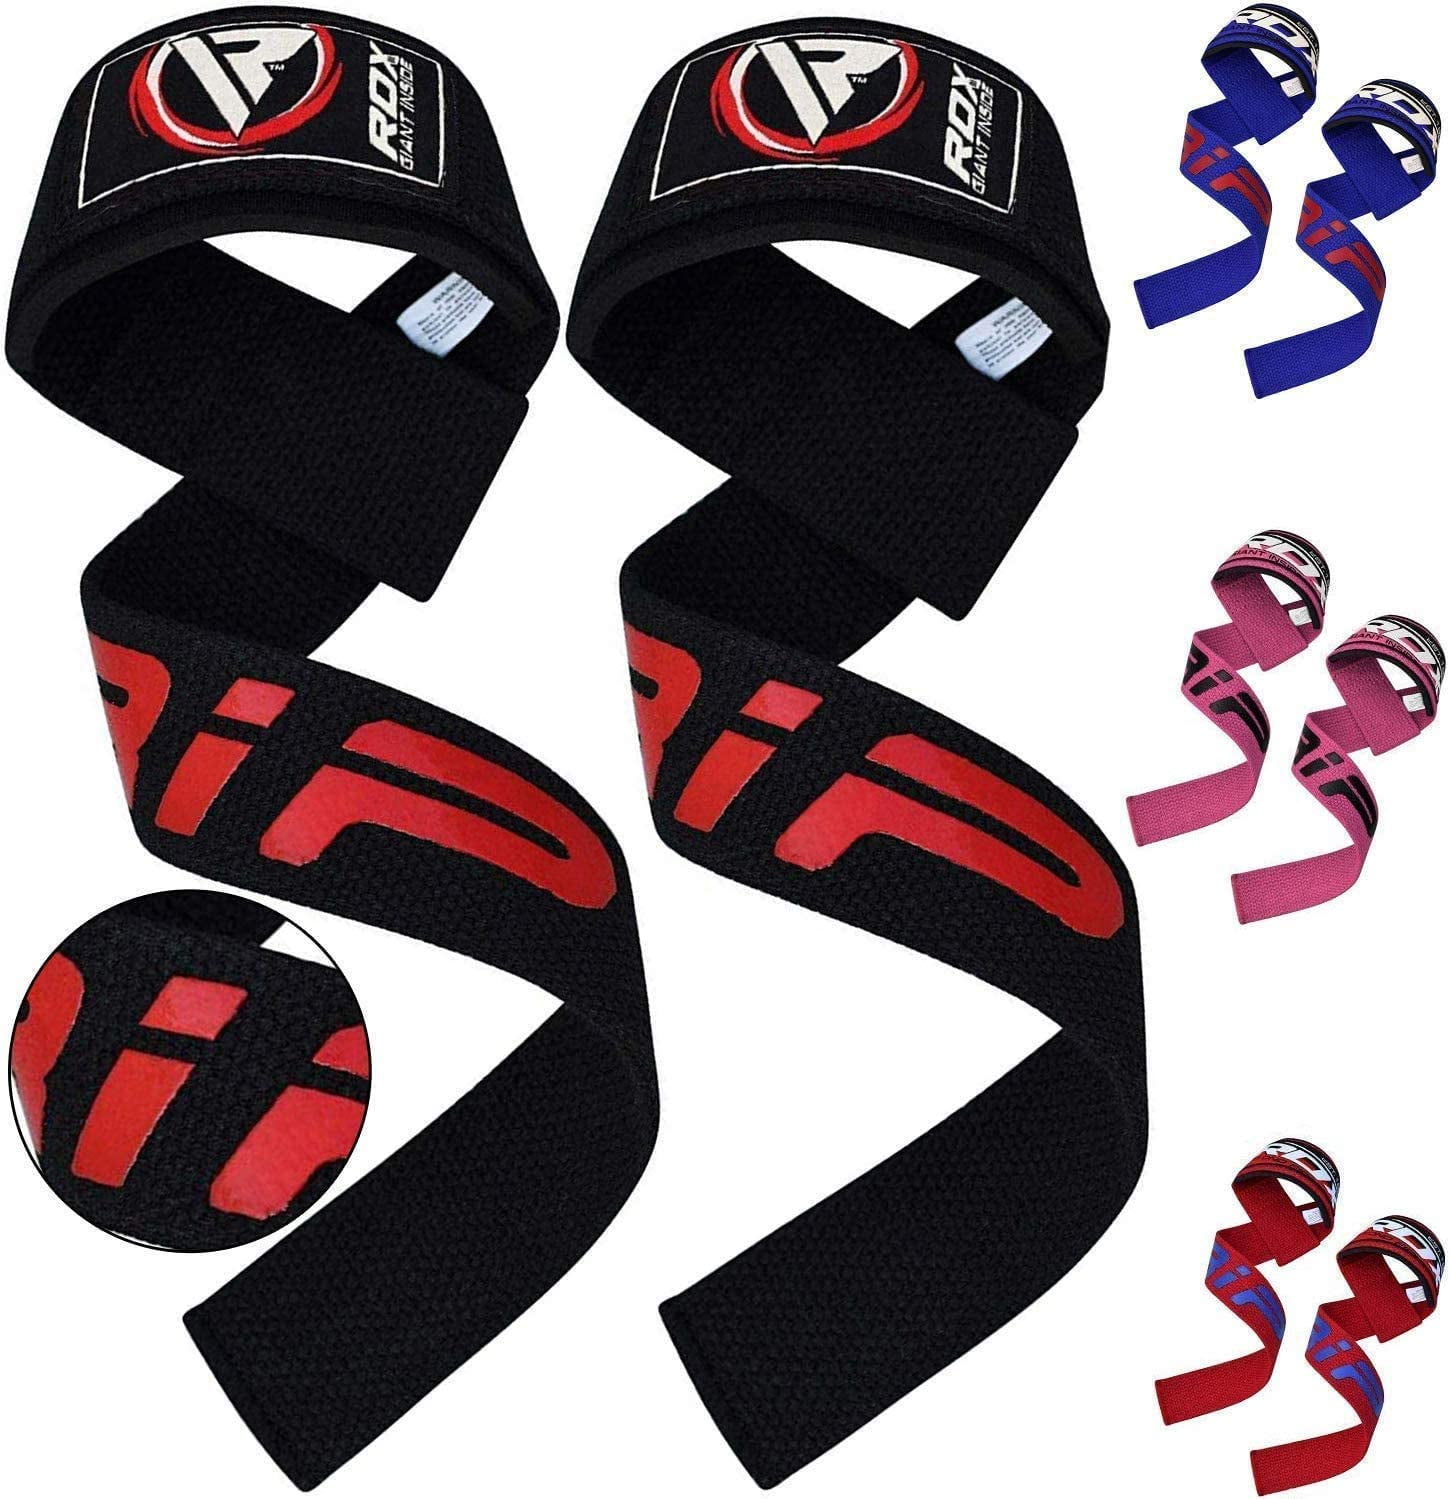 2x Hand Wraps Bar Strap Padded Weight Lifter Straps Boxing MMA Deadlift Gym Wrap 